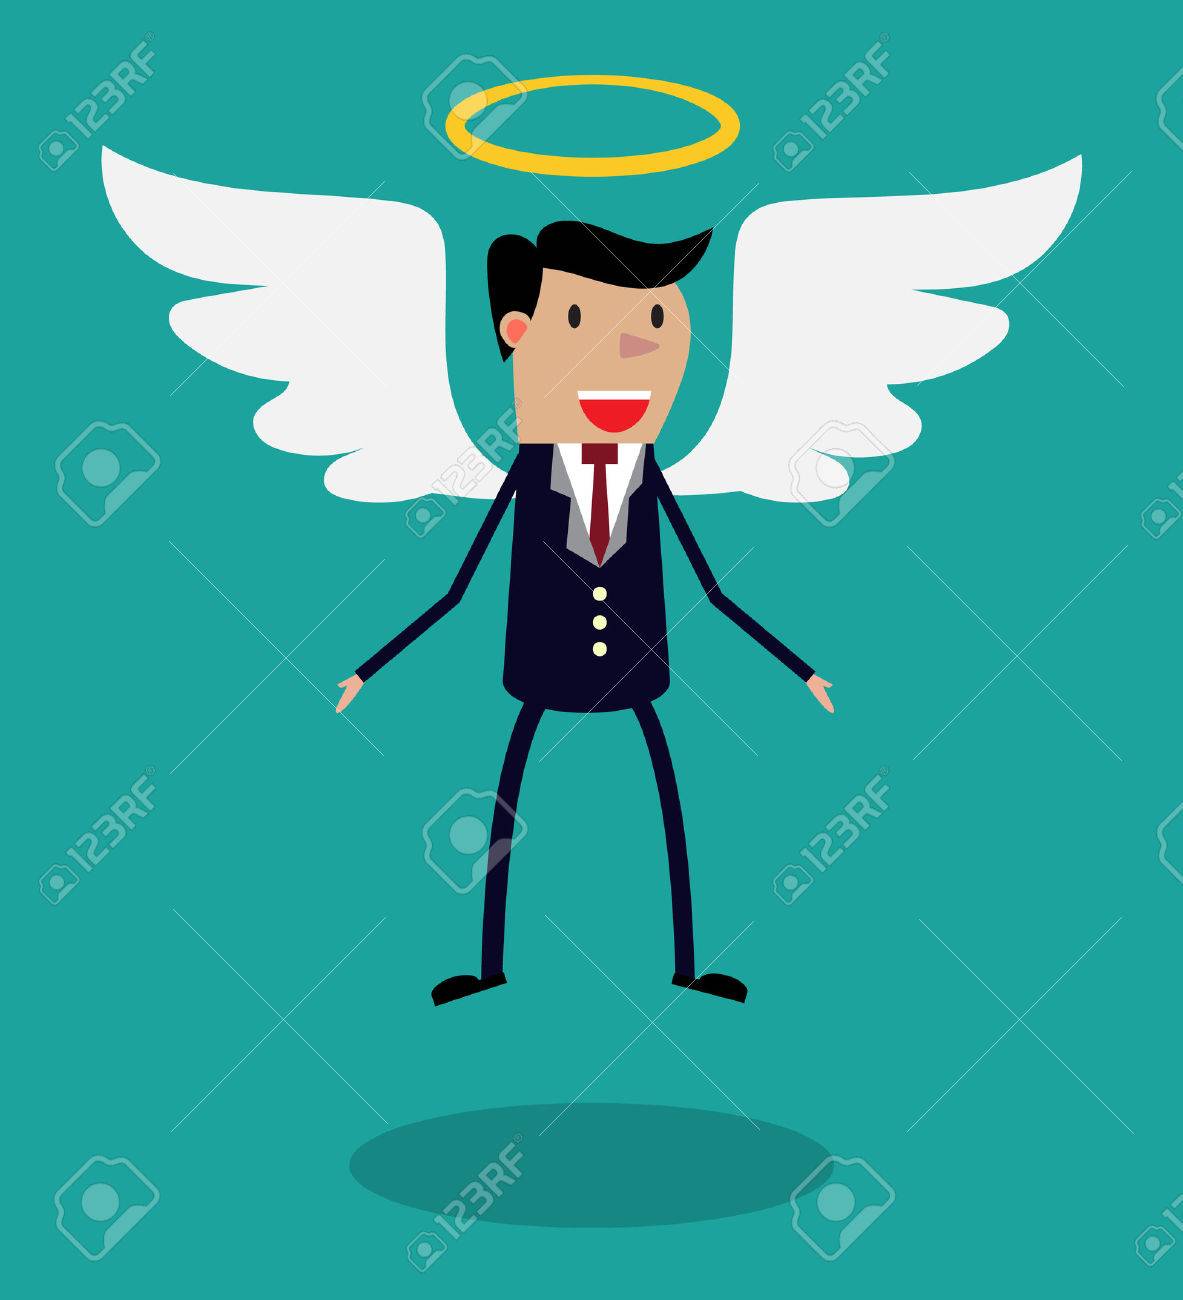 48412791-cartoon-man-character-in-business-suit-with-wings-and-halo-flying-in-the-air-metaphor-for-business-a.jpg